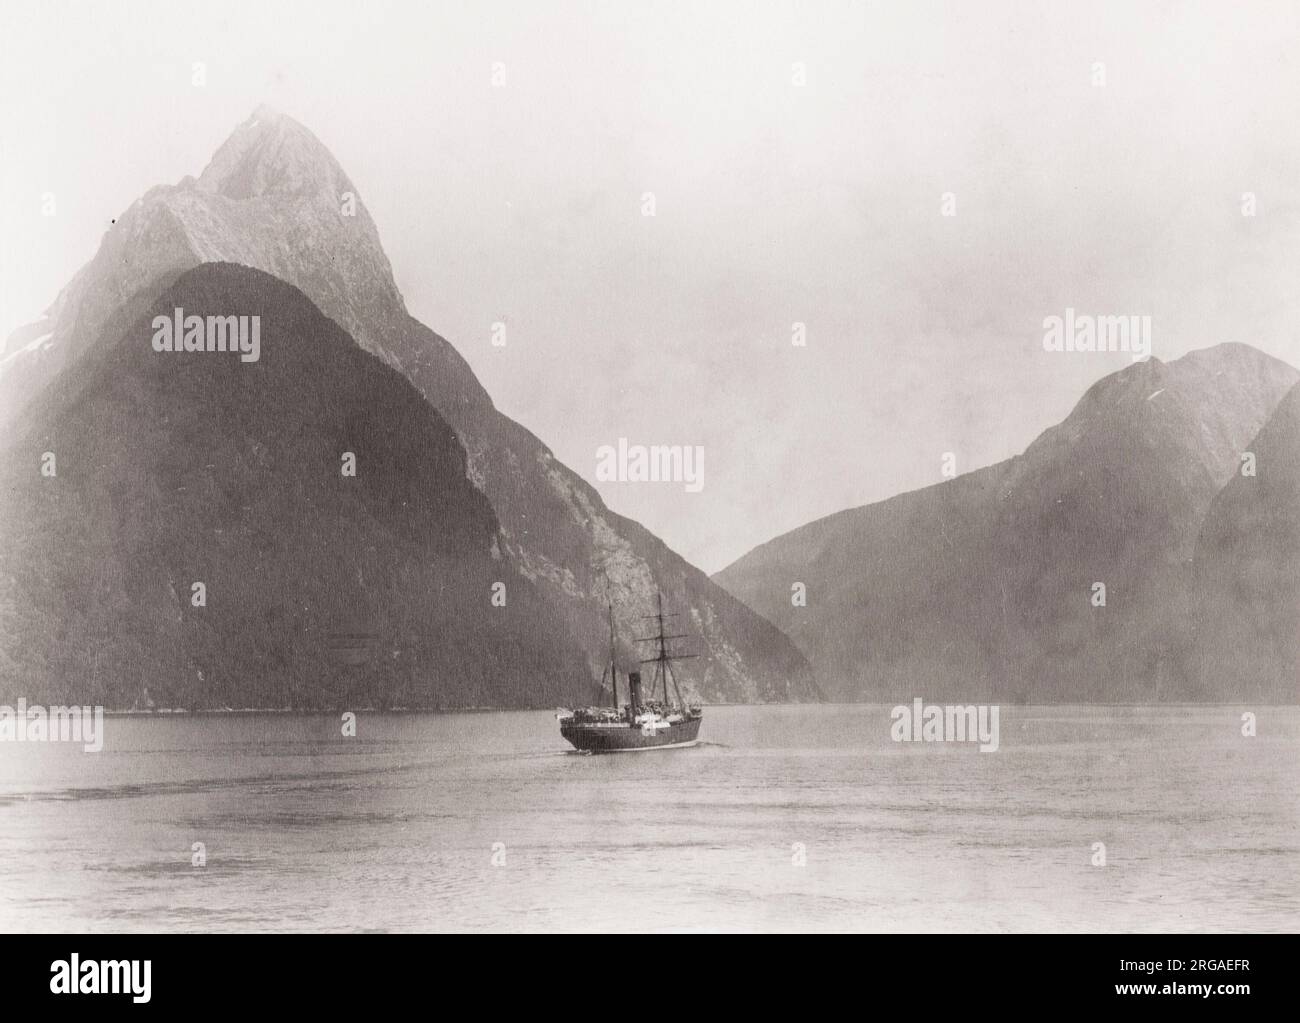 Vintage 19th century photograph: misty morning, Milford Sound New Zealand, boat in the water. Stock Photo